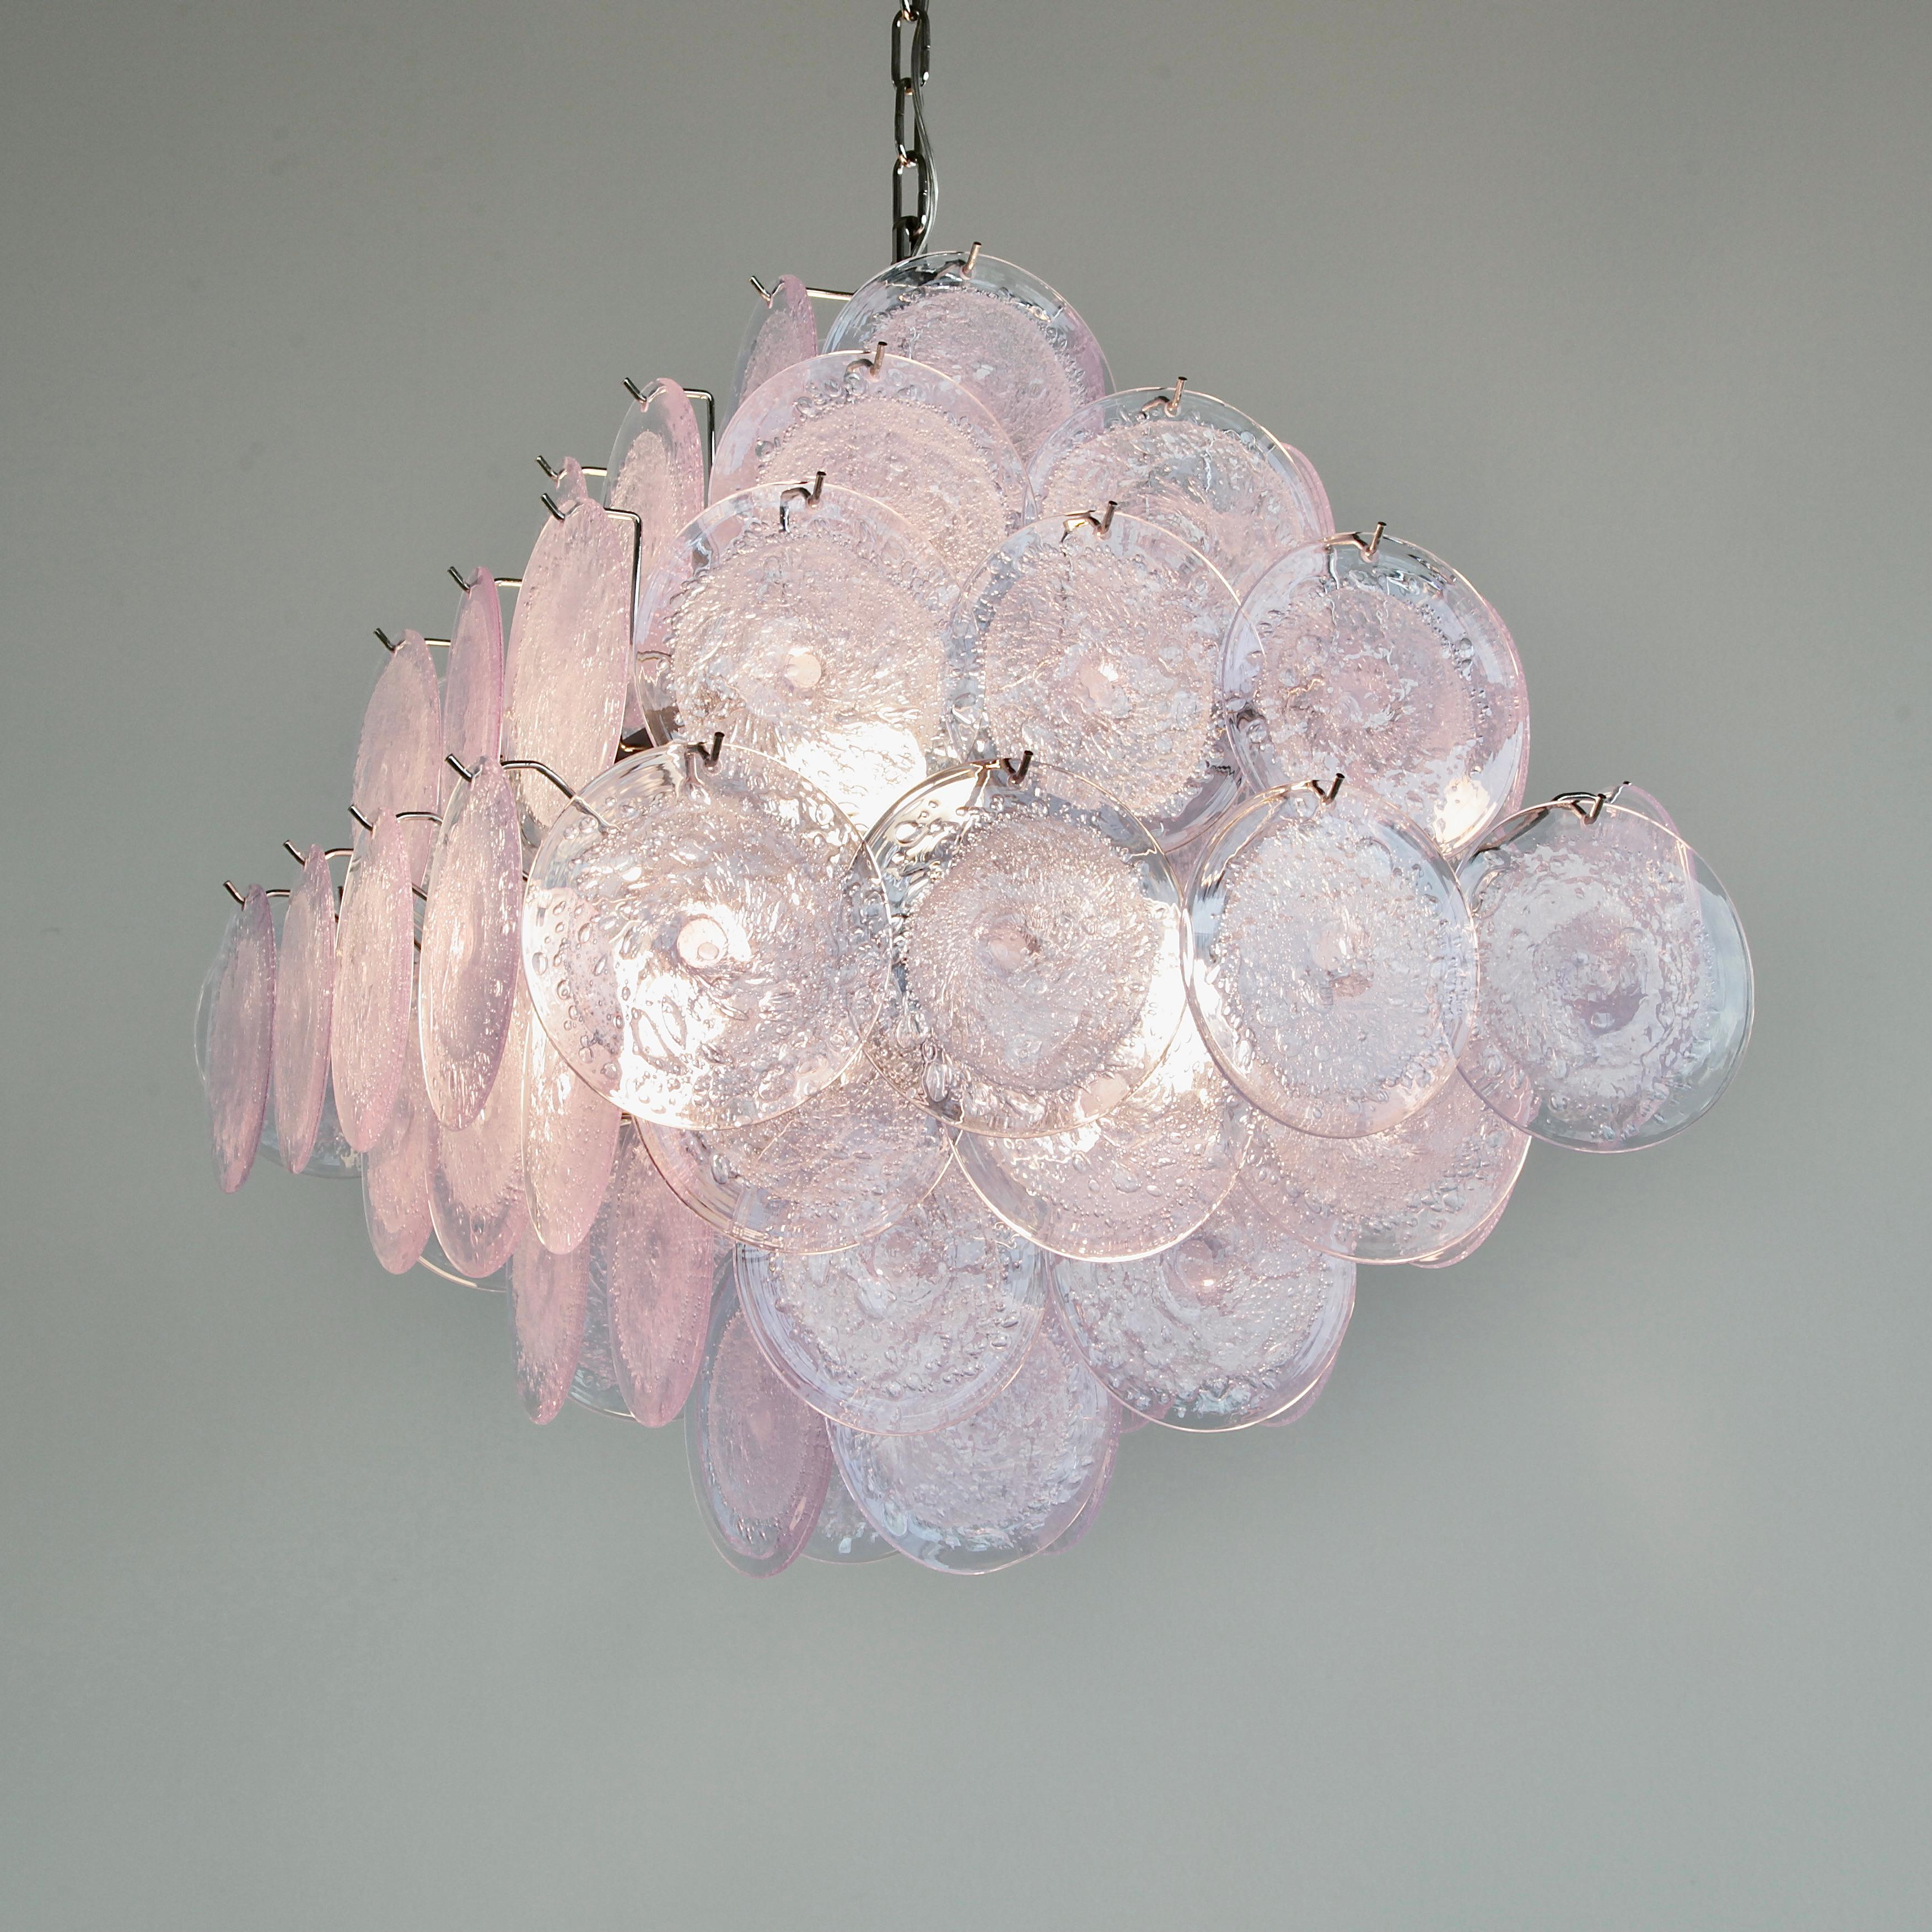 Large glass disk chandelier. Italy, Murano.

Chandelier with Lavender coloured glass disks, hand-made in Murano. Metal frame with eight light sockets.